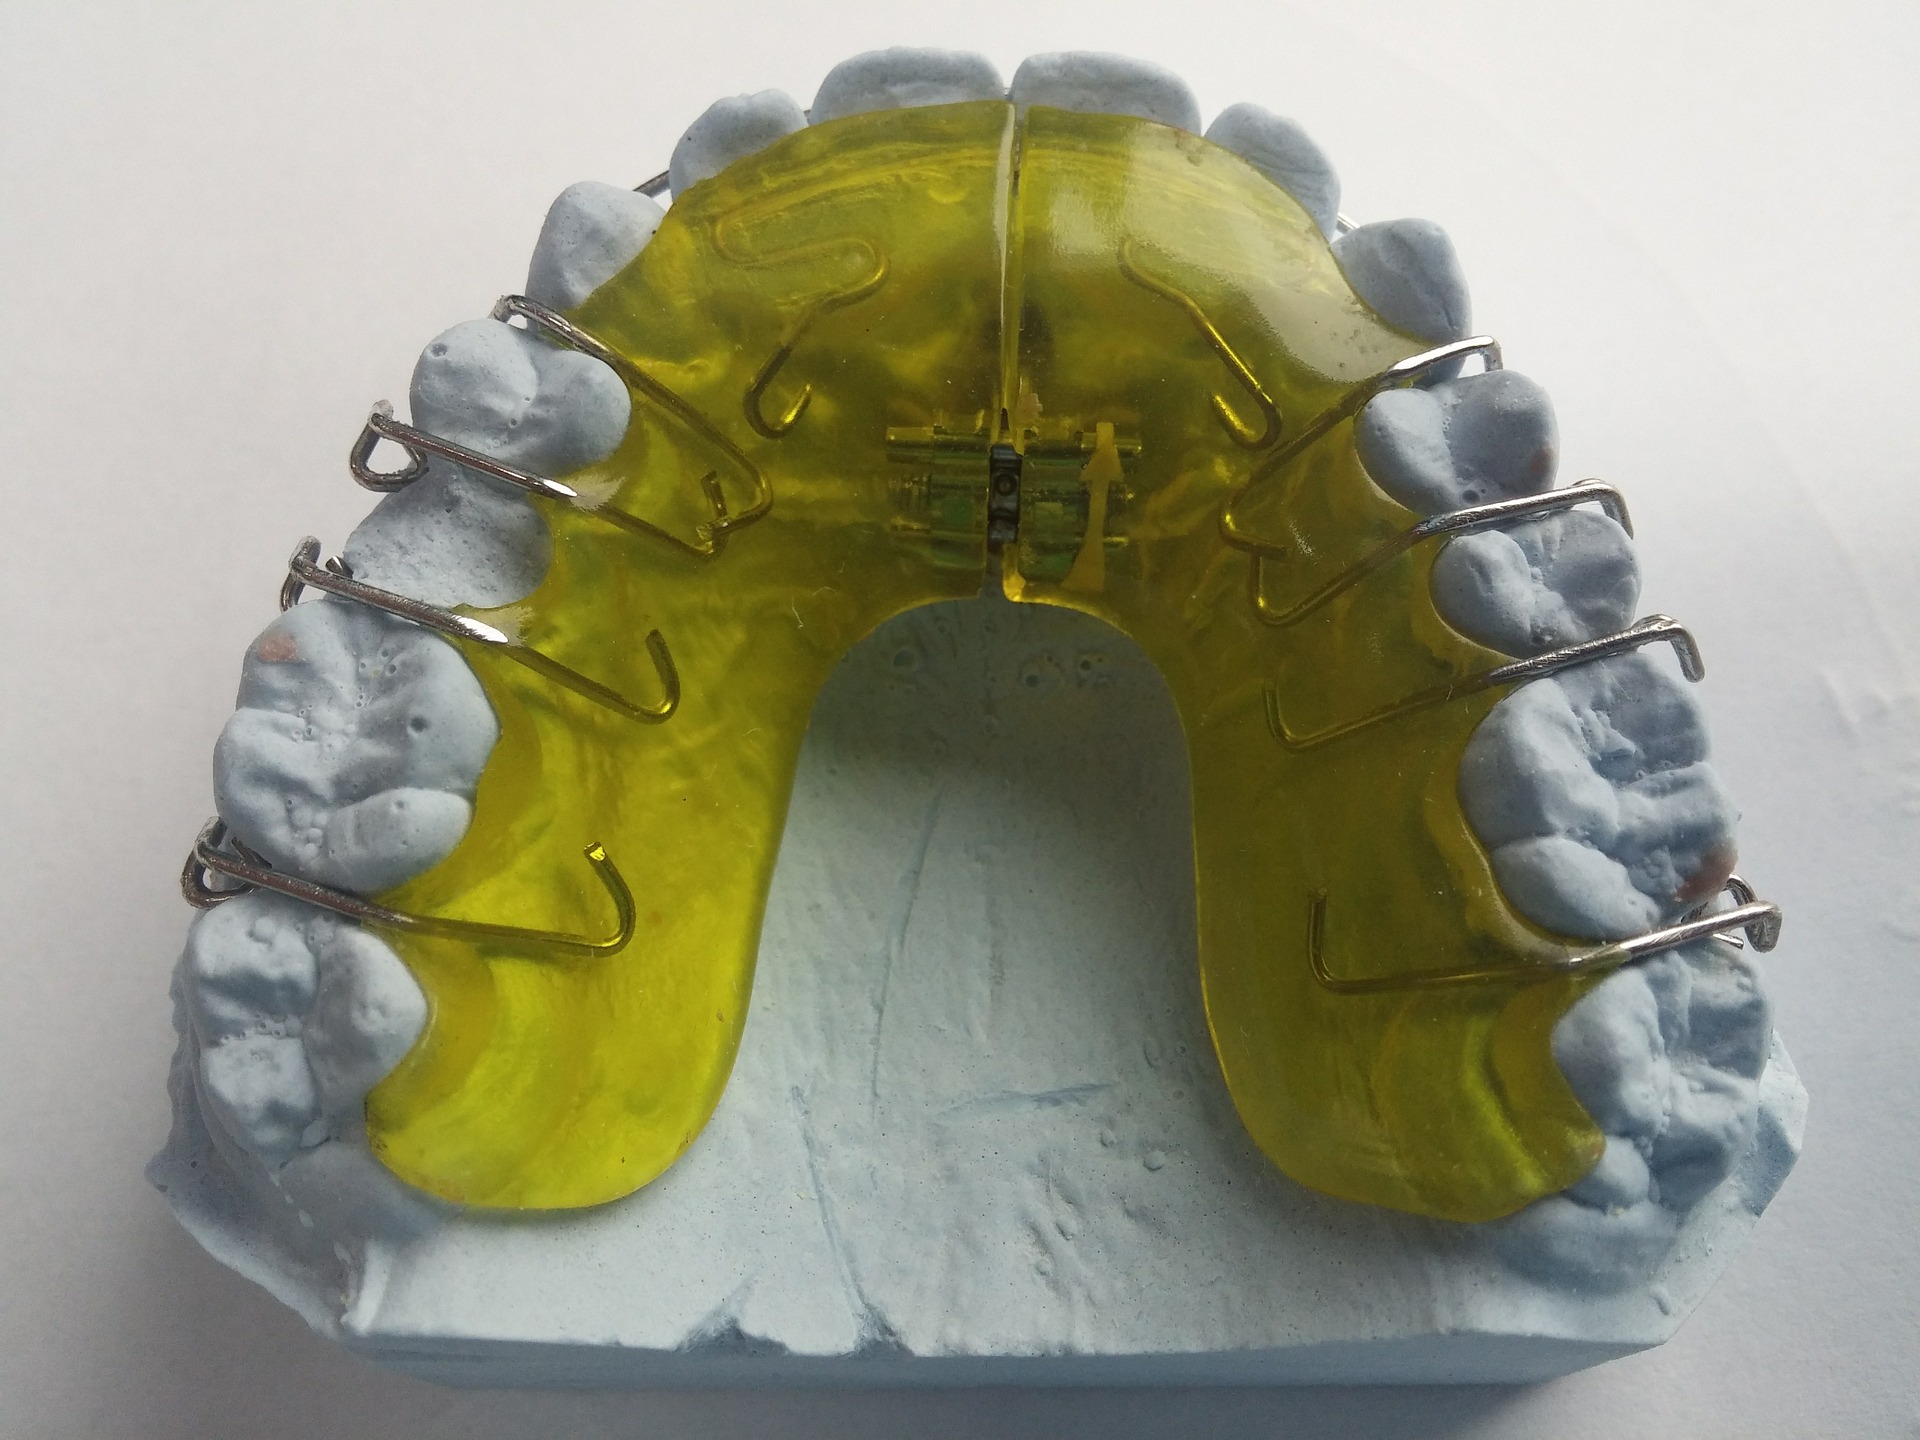 Dental retainers